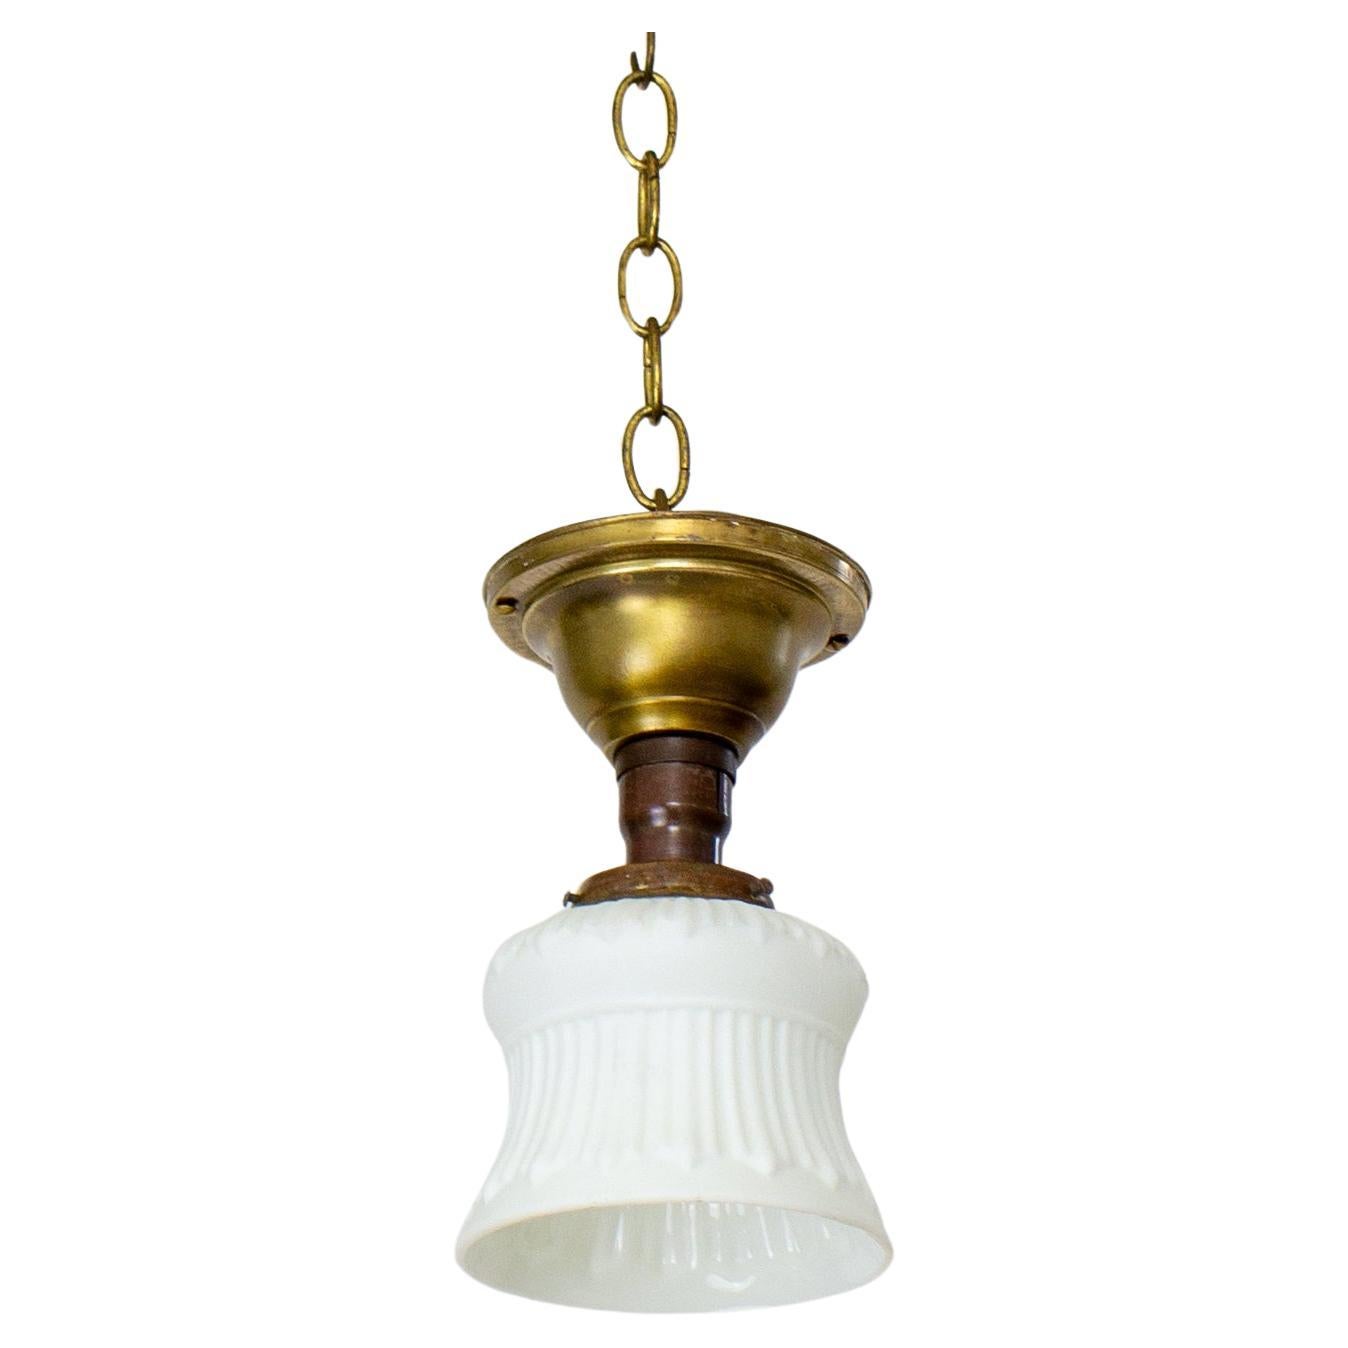 Early 20th Century Small White Glass Neoclassical Revival Flush Pendant